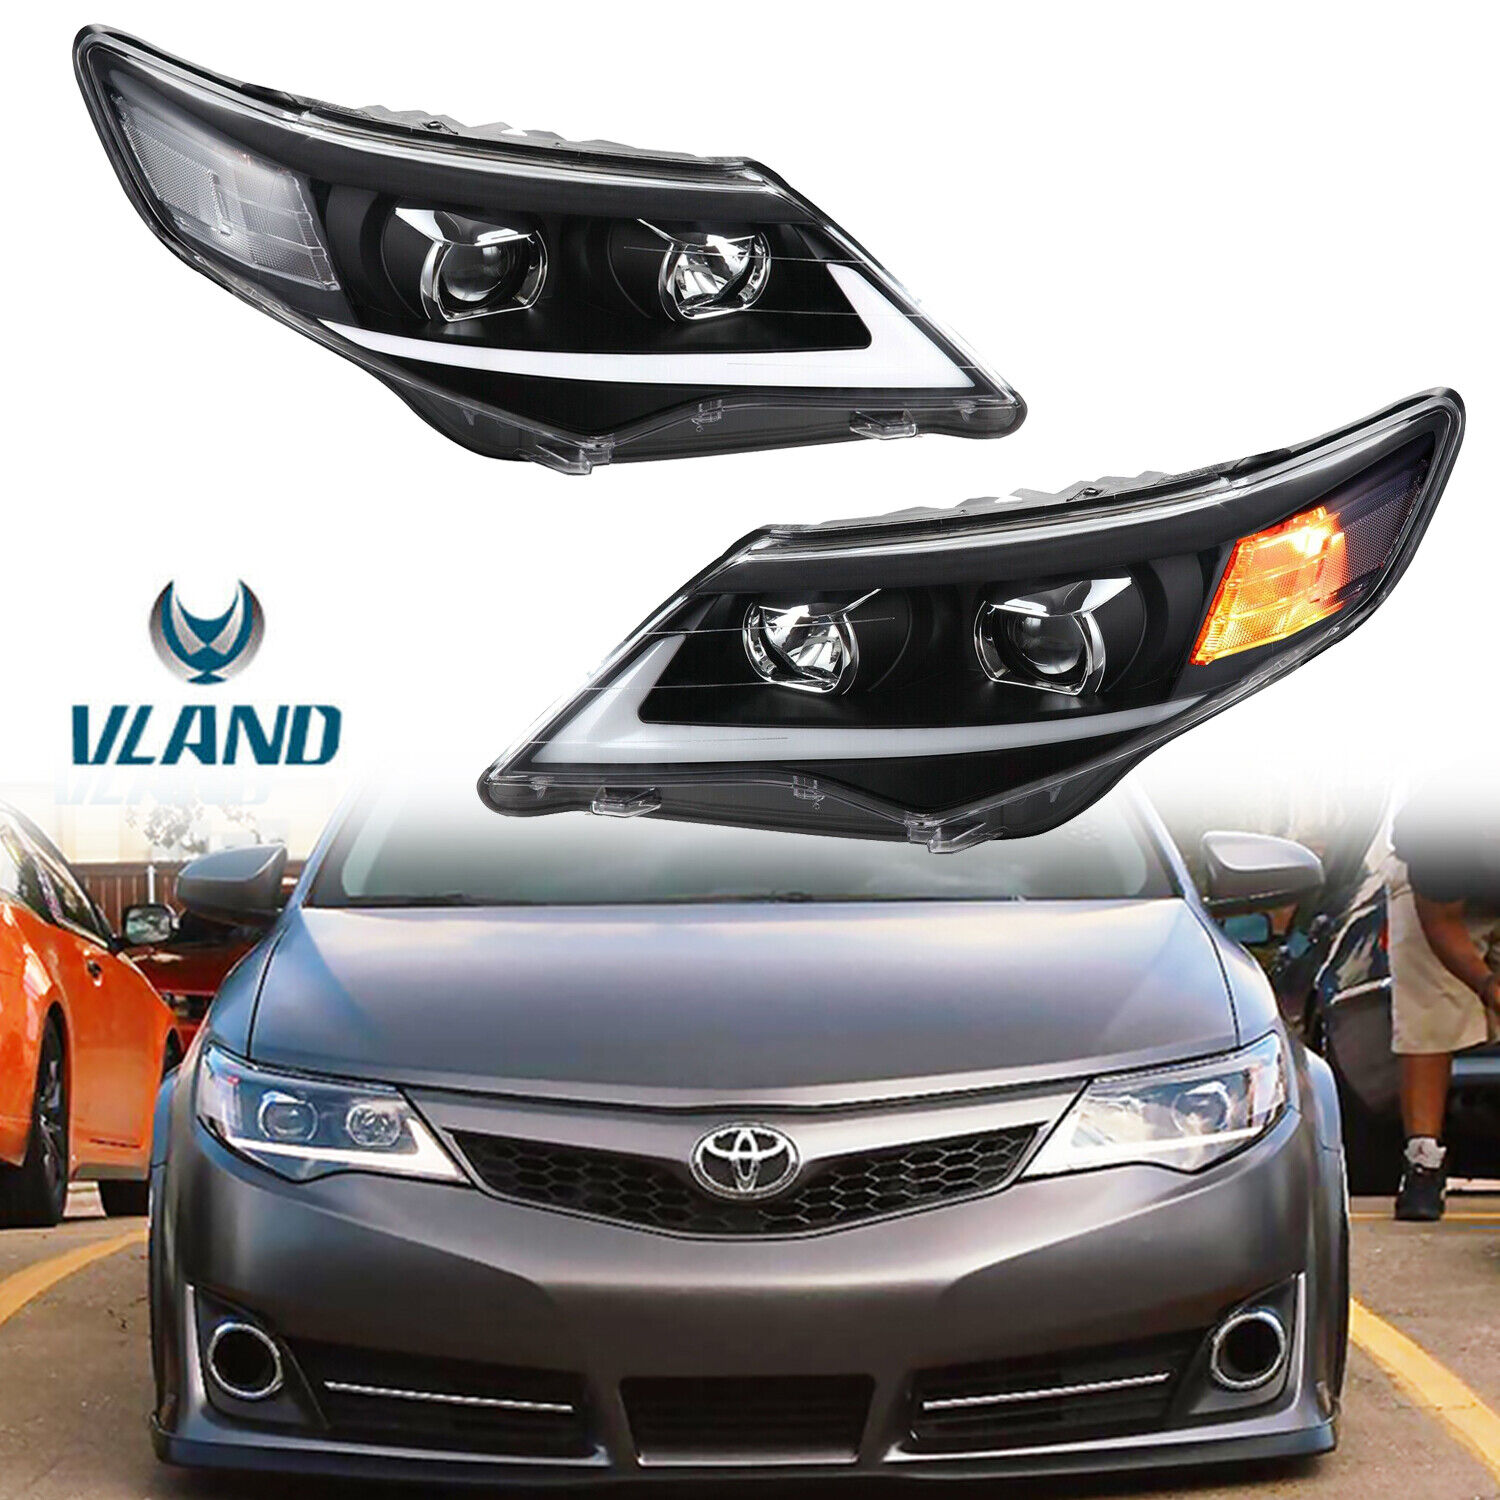 Set LED DRL Projector Headlights Amber Blinker For 2012-2014 Toyota Camry